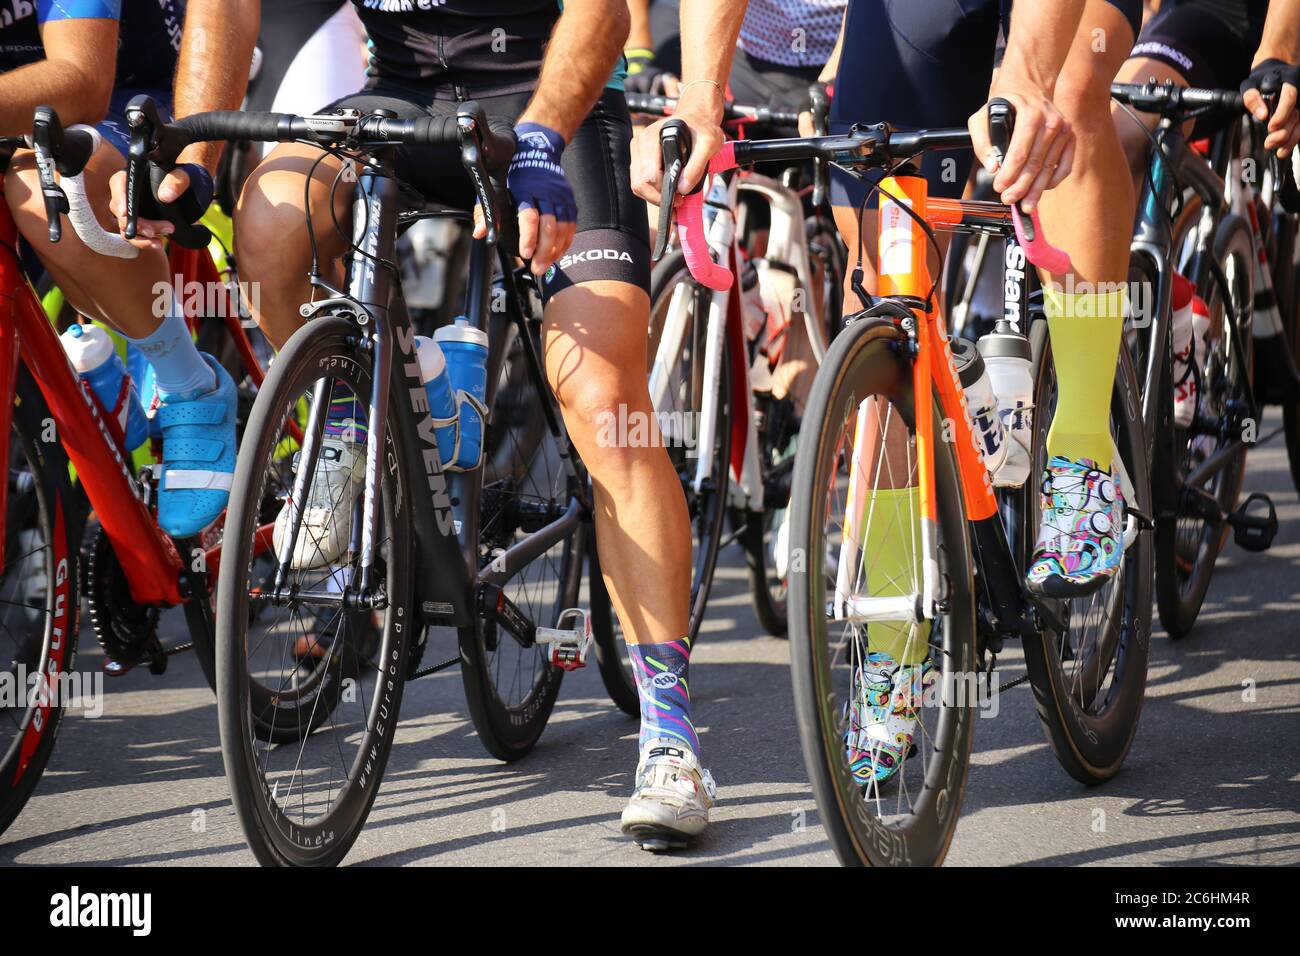 Detaild view of a cycle race (Mutterstadt, Germany) editorial use only Stock Photo